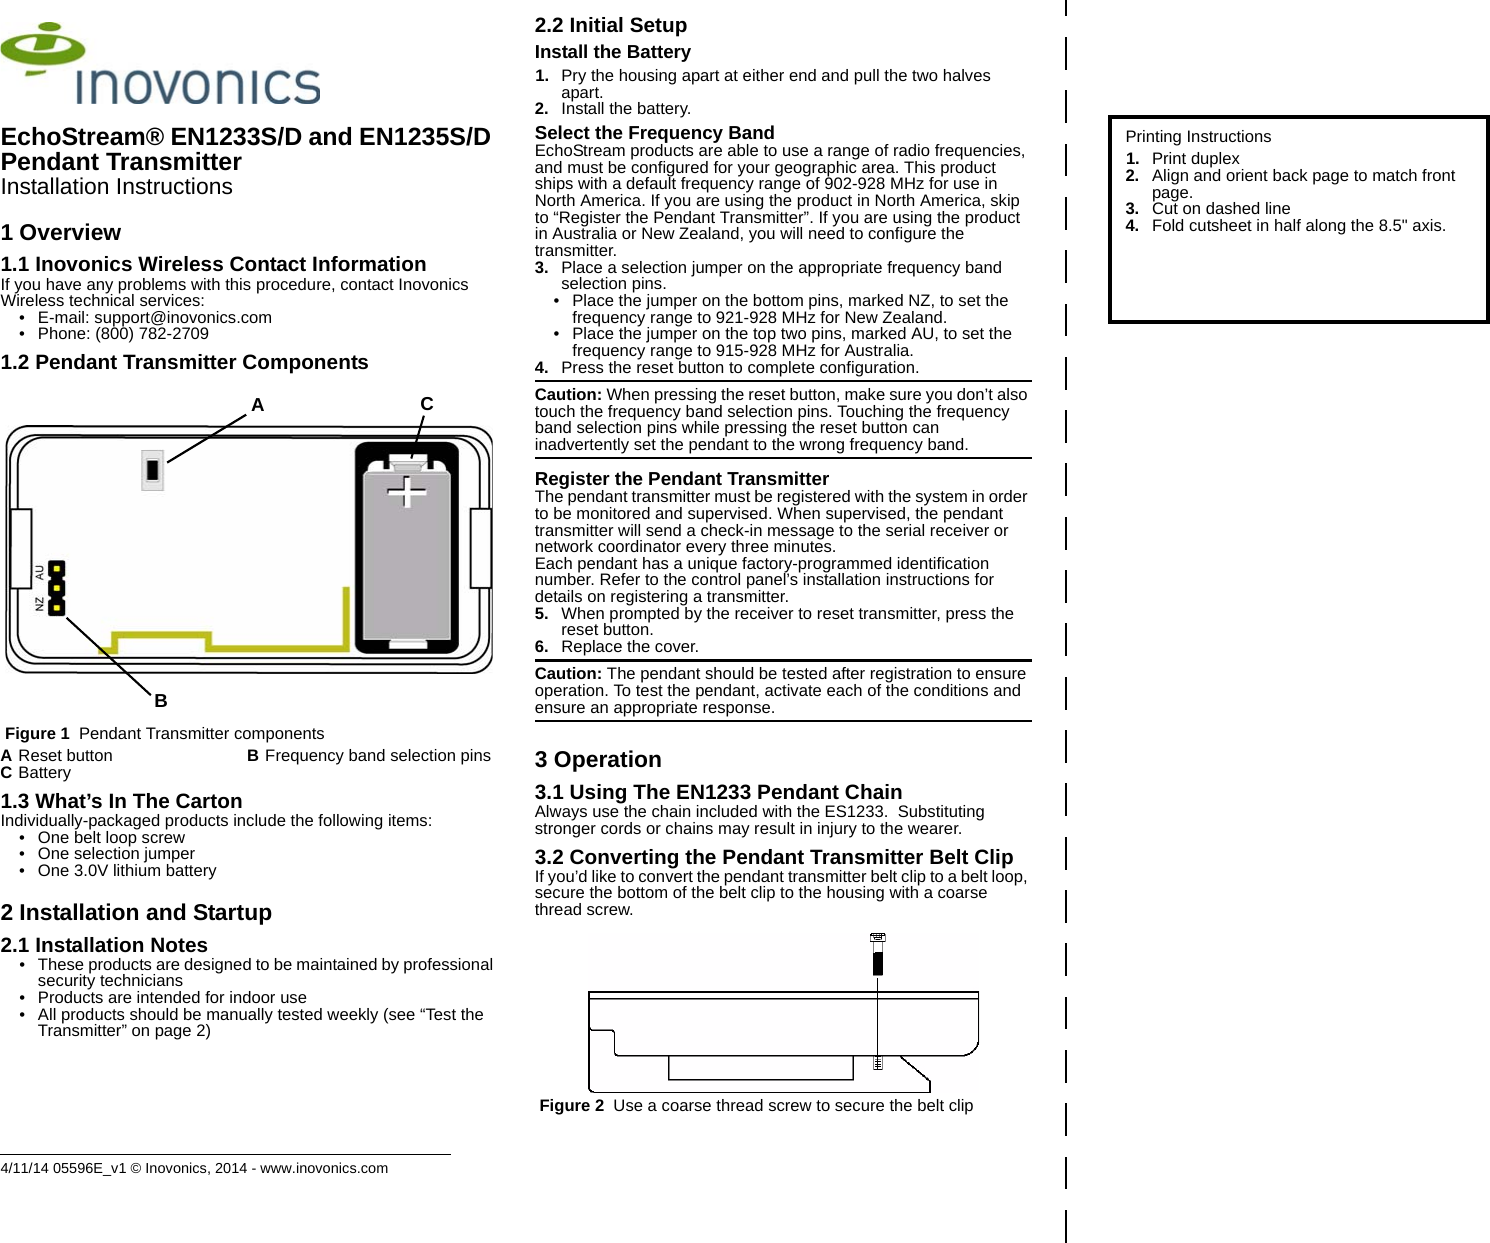 4/11/14 05596E_v1 © Inovonics, 2014 - www.inovonics.comEchoStream® EN1233S/D and EN1235S/D Pendant TransmitterInstallation Instructions1 Overview1.1 Inovonics Wireless Contact InformationIf you have any problems with this procedure, contact Inovonics Wireless technical services:• E-mail: support@inovonics.com• Phone: (800) 782-27091.2 Pendant Transmitter Components Figure 1  Pendant Transmitter components1.3 What’s In The CartonIndividually-packaged products include the following items:• One belt loop screw• One selection jumper• One 3.0V lithium battery2 Installation and Startup2.1 Installation Notes• These products are designed to be maintained by professional security technicians• Products are intended for indoor use• All products should be manually tested weekly (see “Test the Transmitter” on page 2)2.2 Initial SetupInstall the Battery1. Pry the housing apart at either end and pull the two halves apart.2. Install the battery.Select the Frequency BandEchoStream products are able to use a range of radio frequencies, and must be configured for your geographic area. This product ships with a default frequency range of 902-928 MHz for use in North America. If you are using the product in North America, skip to “Register the Pendant Transmitter”. If you are using the product in Australia or New Zealand, you will need to configure the transmitter.3. Place a selection jumper on the appropriate frequency band selection pins.• Place the jumper on the bottom pins, marked NZ, to set the frequency range to 921-928 MHz for New Zealand.• Place the jumper on the top two pins, marked AU, to set the frequency range to 915-928 MHz for Australia.4. Press the reset button to complete configuration.Caution: When pressing the reset button, make sure you don’t also touch the frequency band selection pins. Touching the frequency band selection pins while pressing the reset button can inadvertently set the pendant to the wrong frequency band.Register the Pendant TransmitterThe pendant transmitter must be registered with the system in order to be monitored and supervised. When supervised, the pendant transmitter will send a check-in message to the serial receiver or network coordinator every three minutes.Each pendant has a unique factory-programmed identification number. Refer to the control panel’s installation instructions for details on registering a transmitter.5. When prompted by the receiver to reset transmitter, press the reset button.6. Replace the cover.Caution: The pendant should be tested after registration to ensure operation. To test the pendant, activate each of the conditions and ensure an appropriate response.3 Operation3.1 Using The EN1233 Pendant ChainAlways use the chain included with the ES1233.  Substituting stronger cords or chains may result in injury to the wearer.3.2 Converting the Pendant Transmitter Belt ClipIf you’d like to convert the pendant transmitter belt clip to a belt loop, secure the bottom of the belt clip to the housing with a coarse thread screw. Figure 2  Use a coarse thread screw to secure the belt clipAReset button BFrequency band selection pinsCBatteryBACPrinting Instructions1. Print duplex2. Align and orient back page to match front page.3. Cut on dashed line4. Fold cutsheet in half along the 8.5&quot; axis.